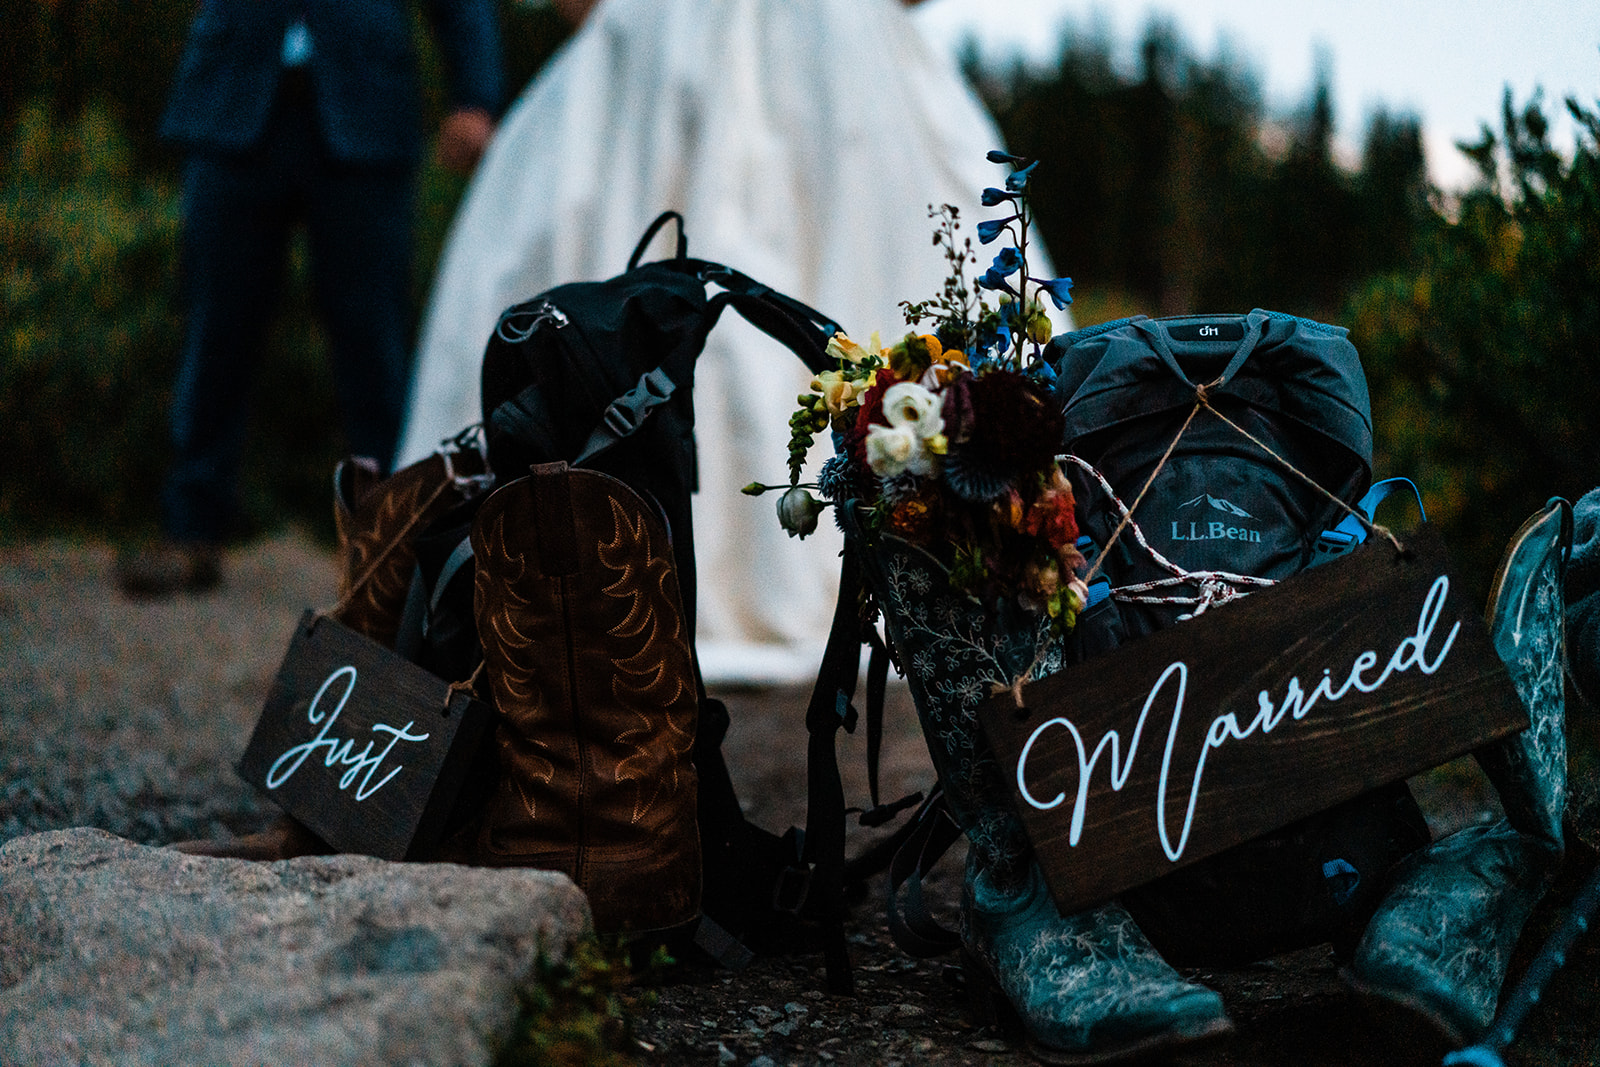 Bride and groom bags with the words "just married"